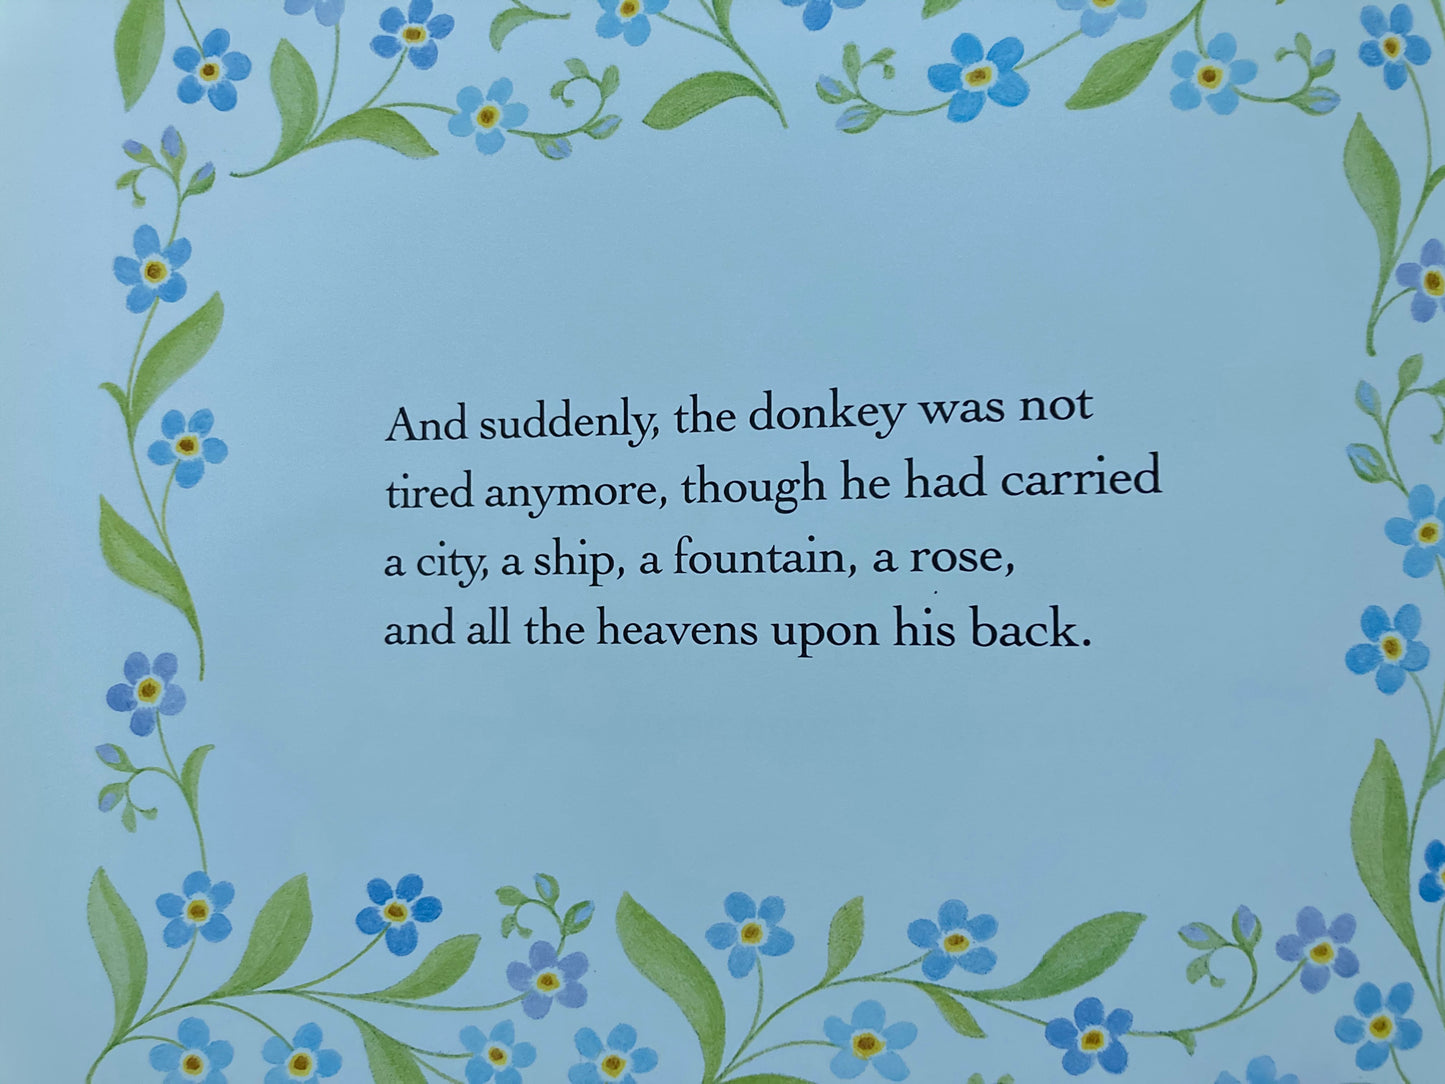 Children's Picture Book - THE DONKEY'S DREAM